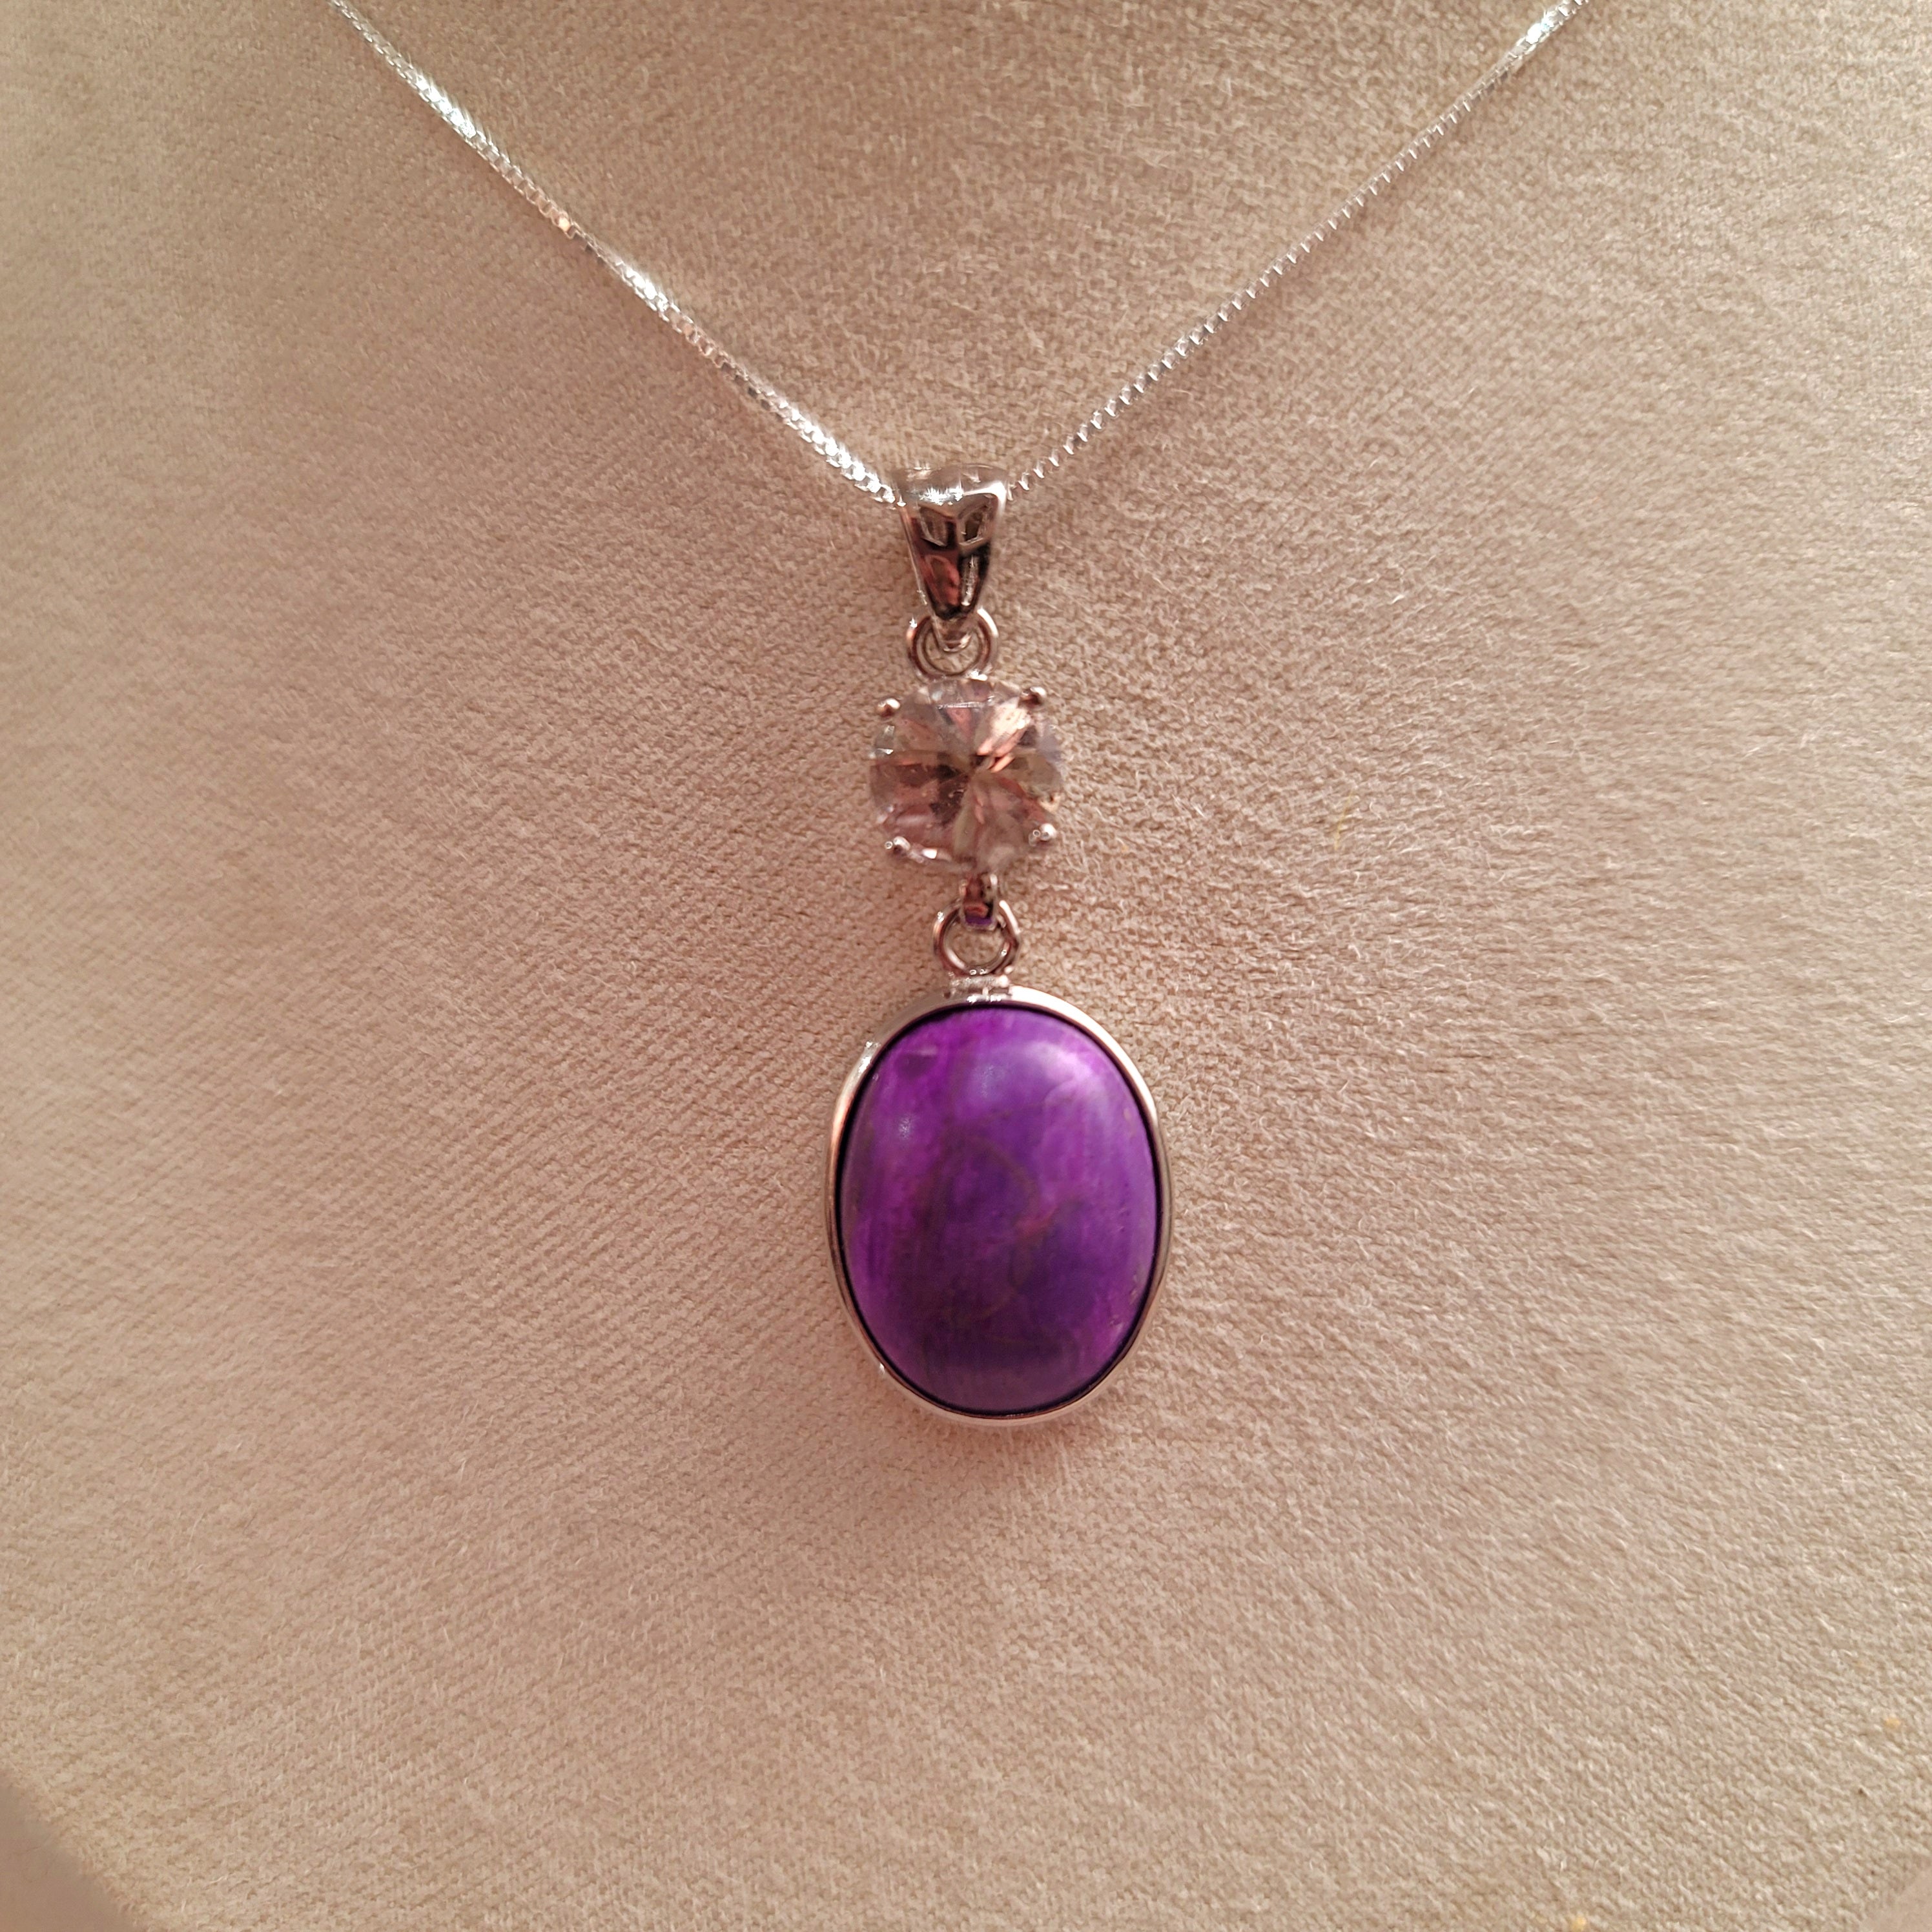 Pink Fire Covellite in Quartz and Sugilite .925 Silver Necklace for Spiritual Evolution and Energy Flow